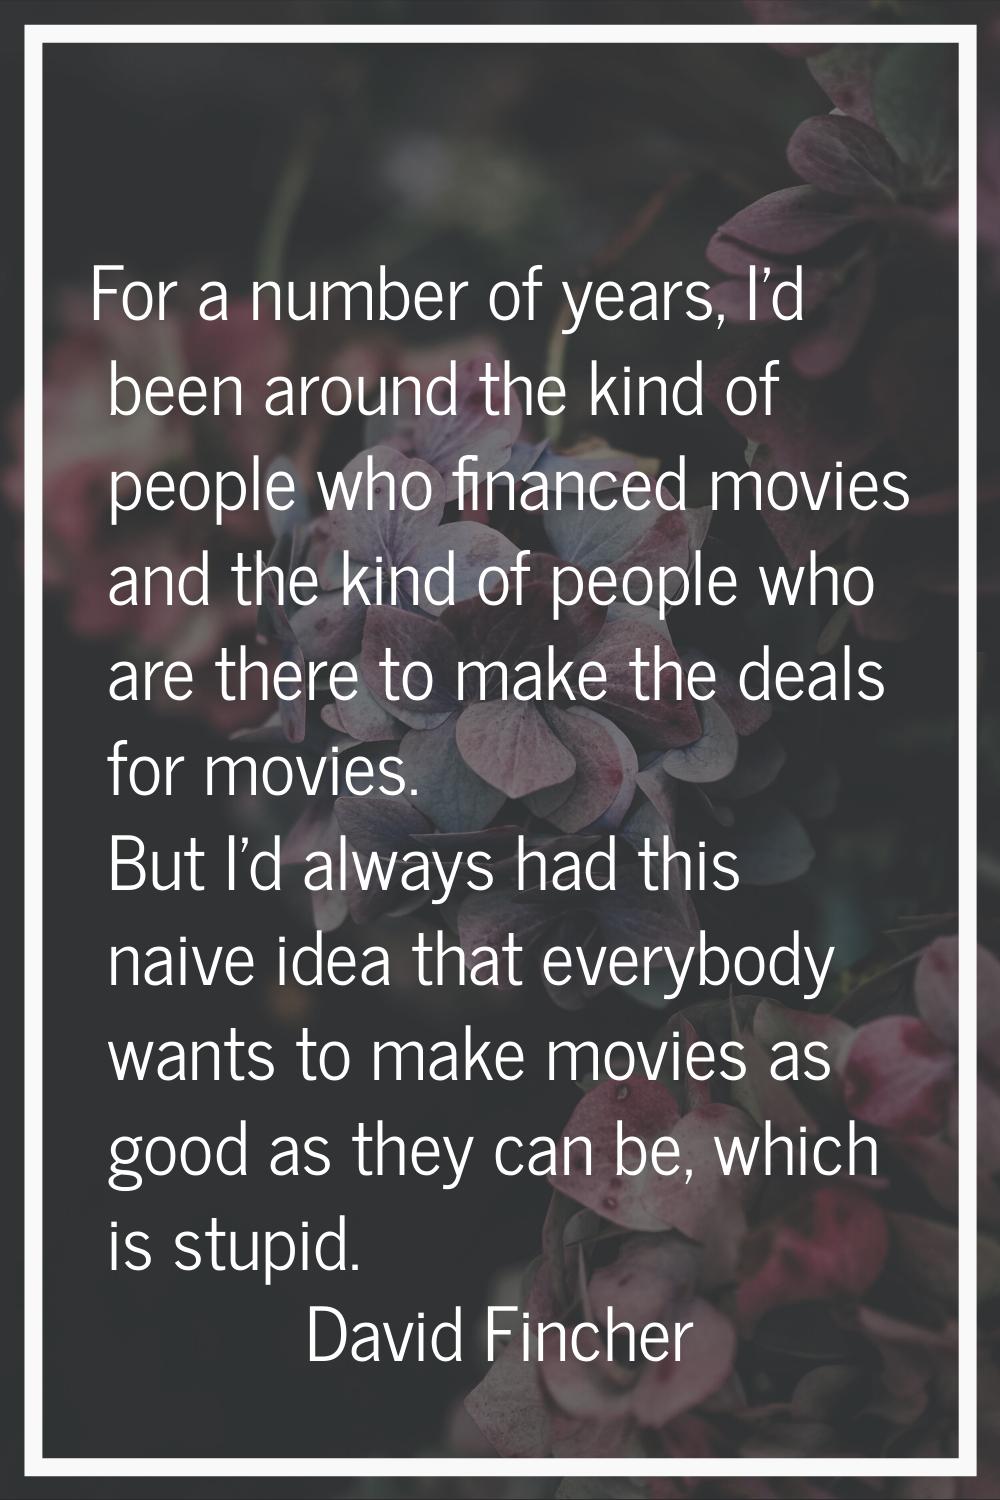 For a number of years, I'd been around the kind of people who financed movies and the kind of peopl